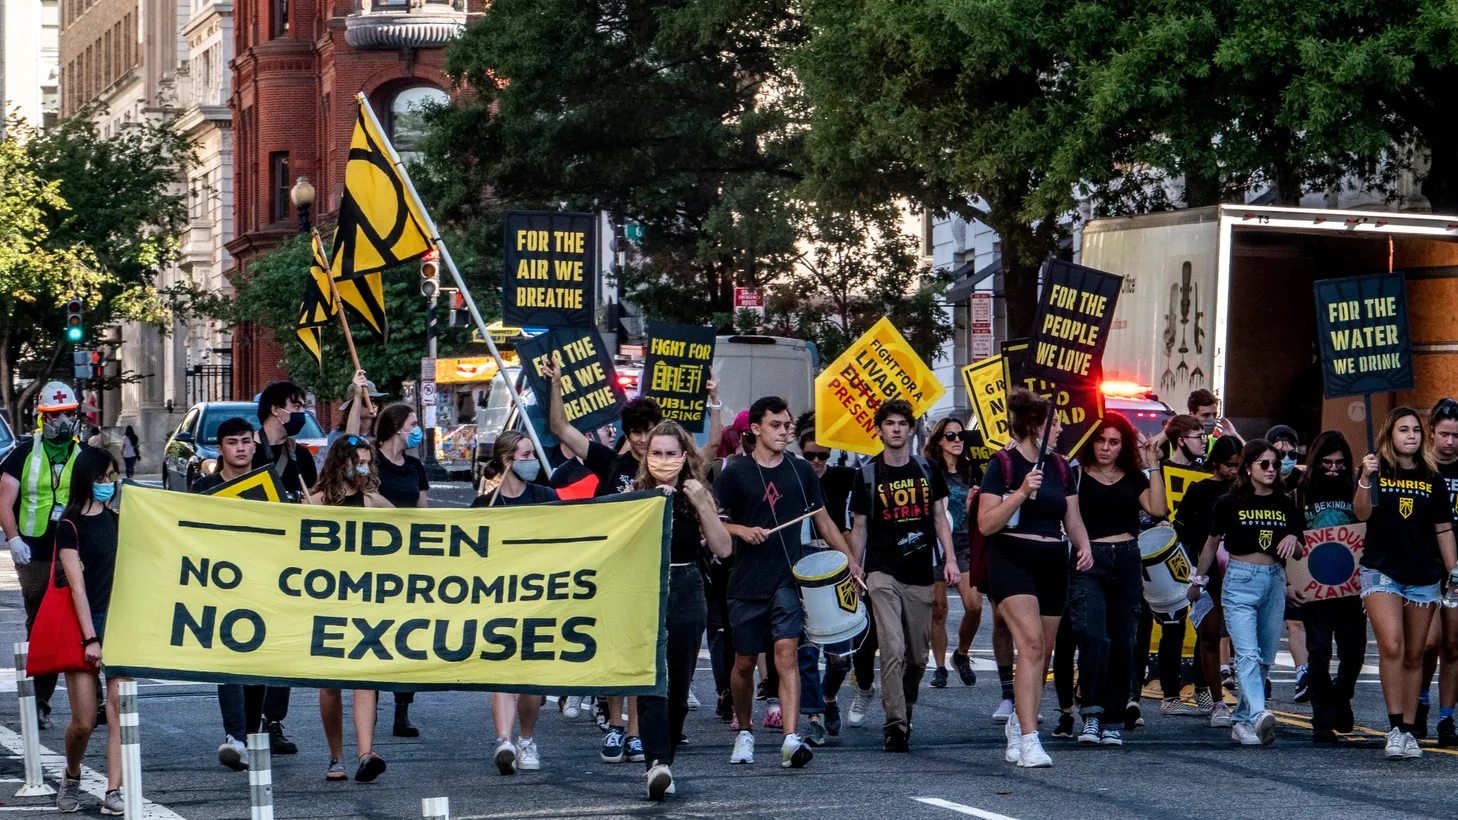 Climate activists march in Washington D.C., carrying signs that say, “Biden: No compromises, no excuses,” “For the air we breathe,” “For the water we drink.”